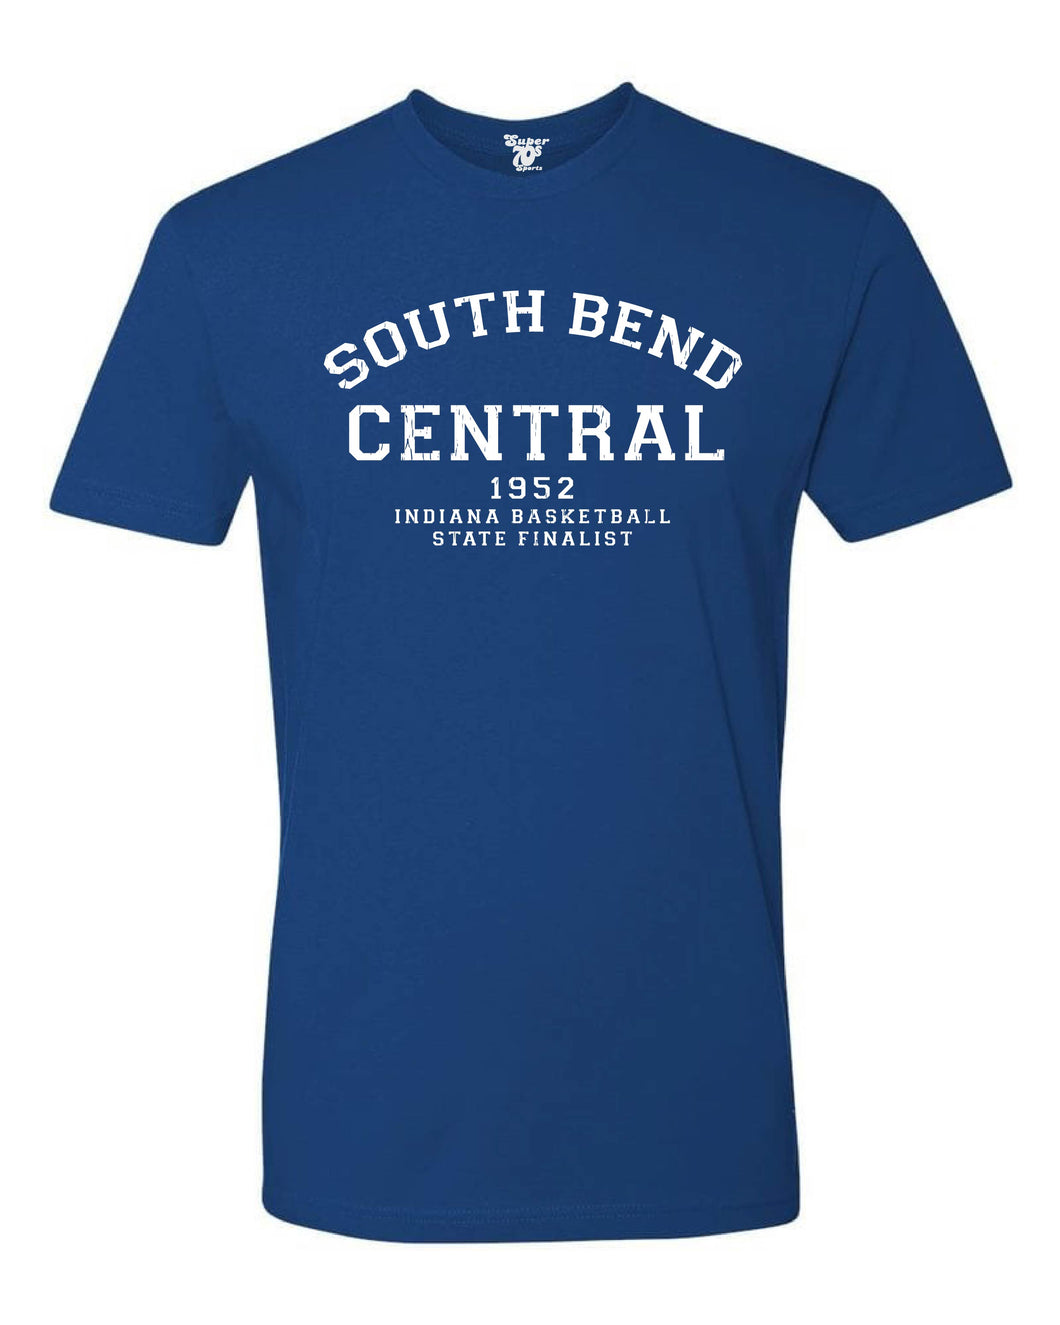 South Bend Central Tee